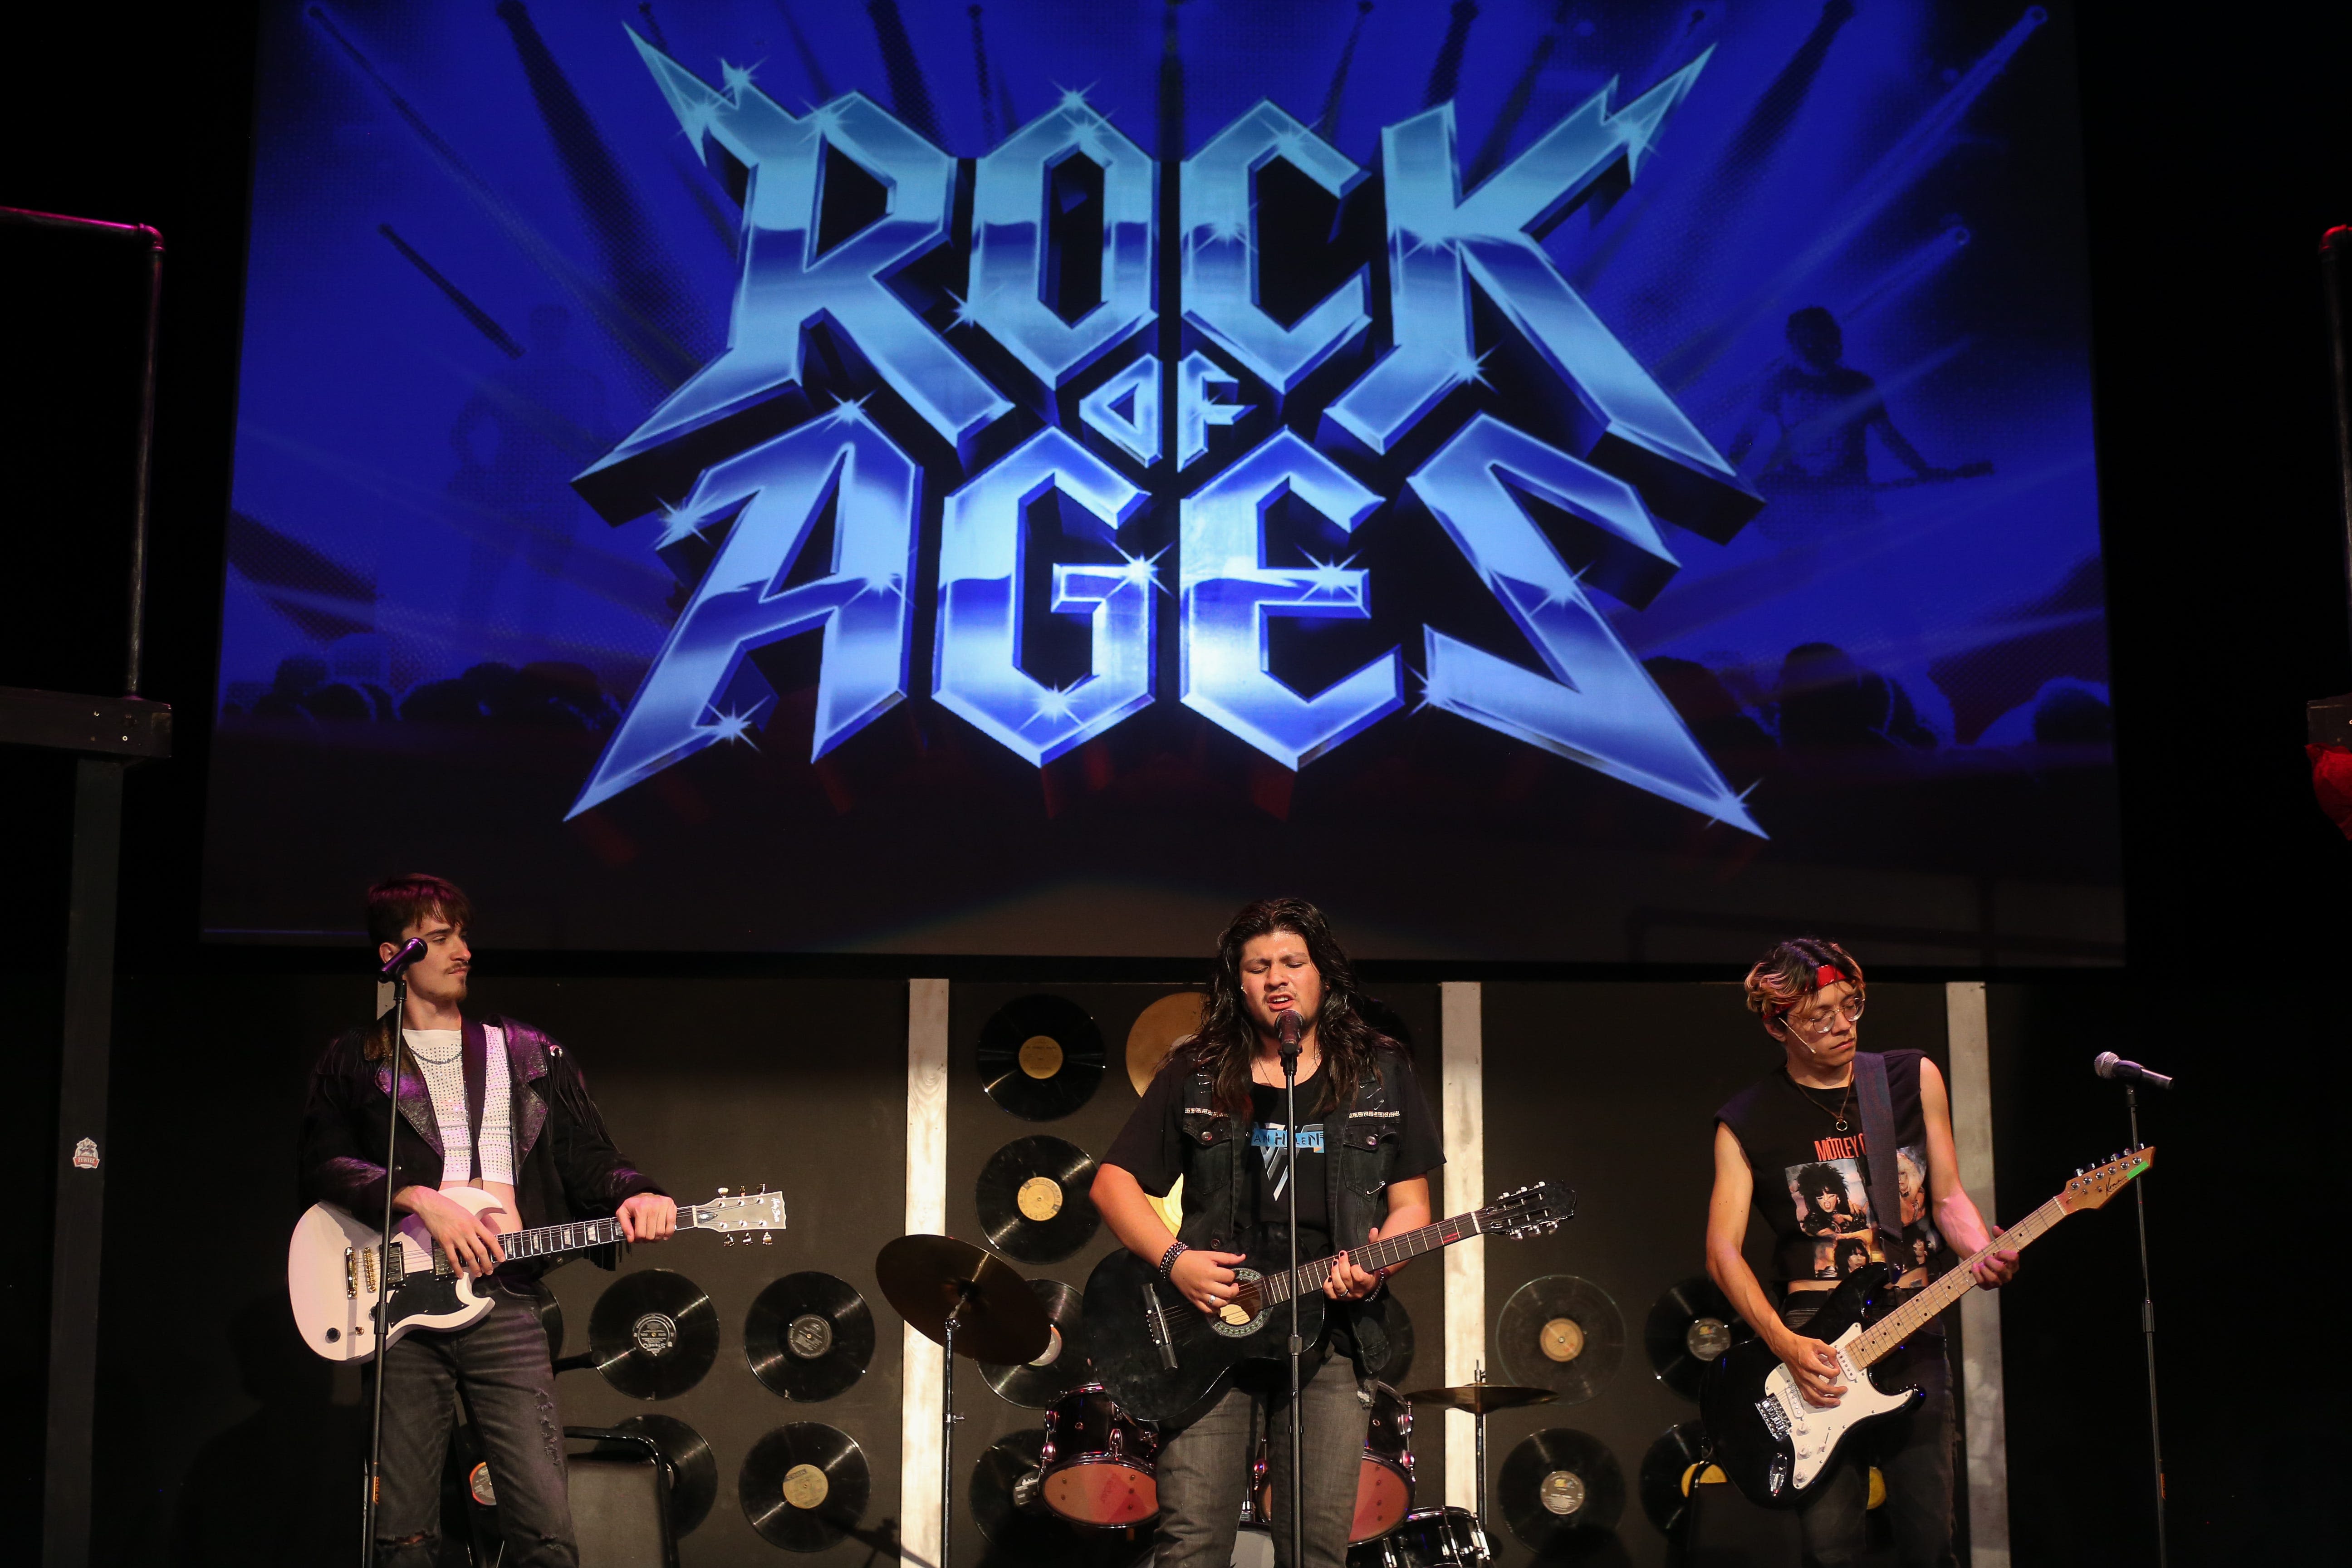 'Dream come true': Harbor Playhouse puts on 'Rock of Ages' for summer musical